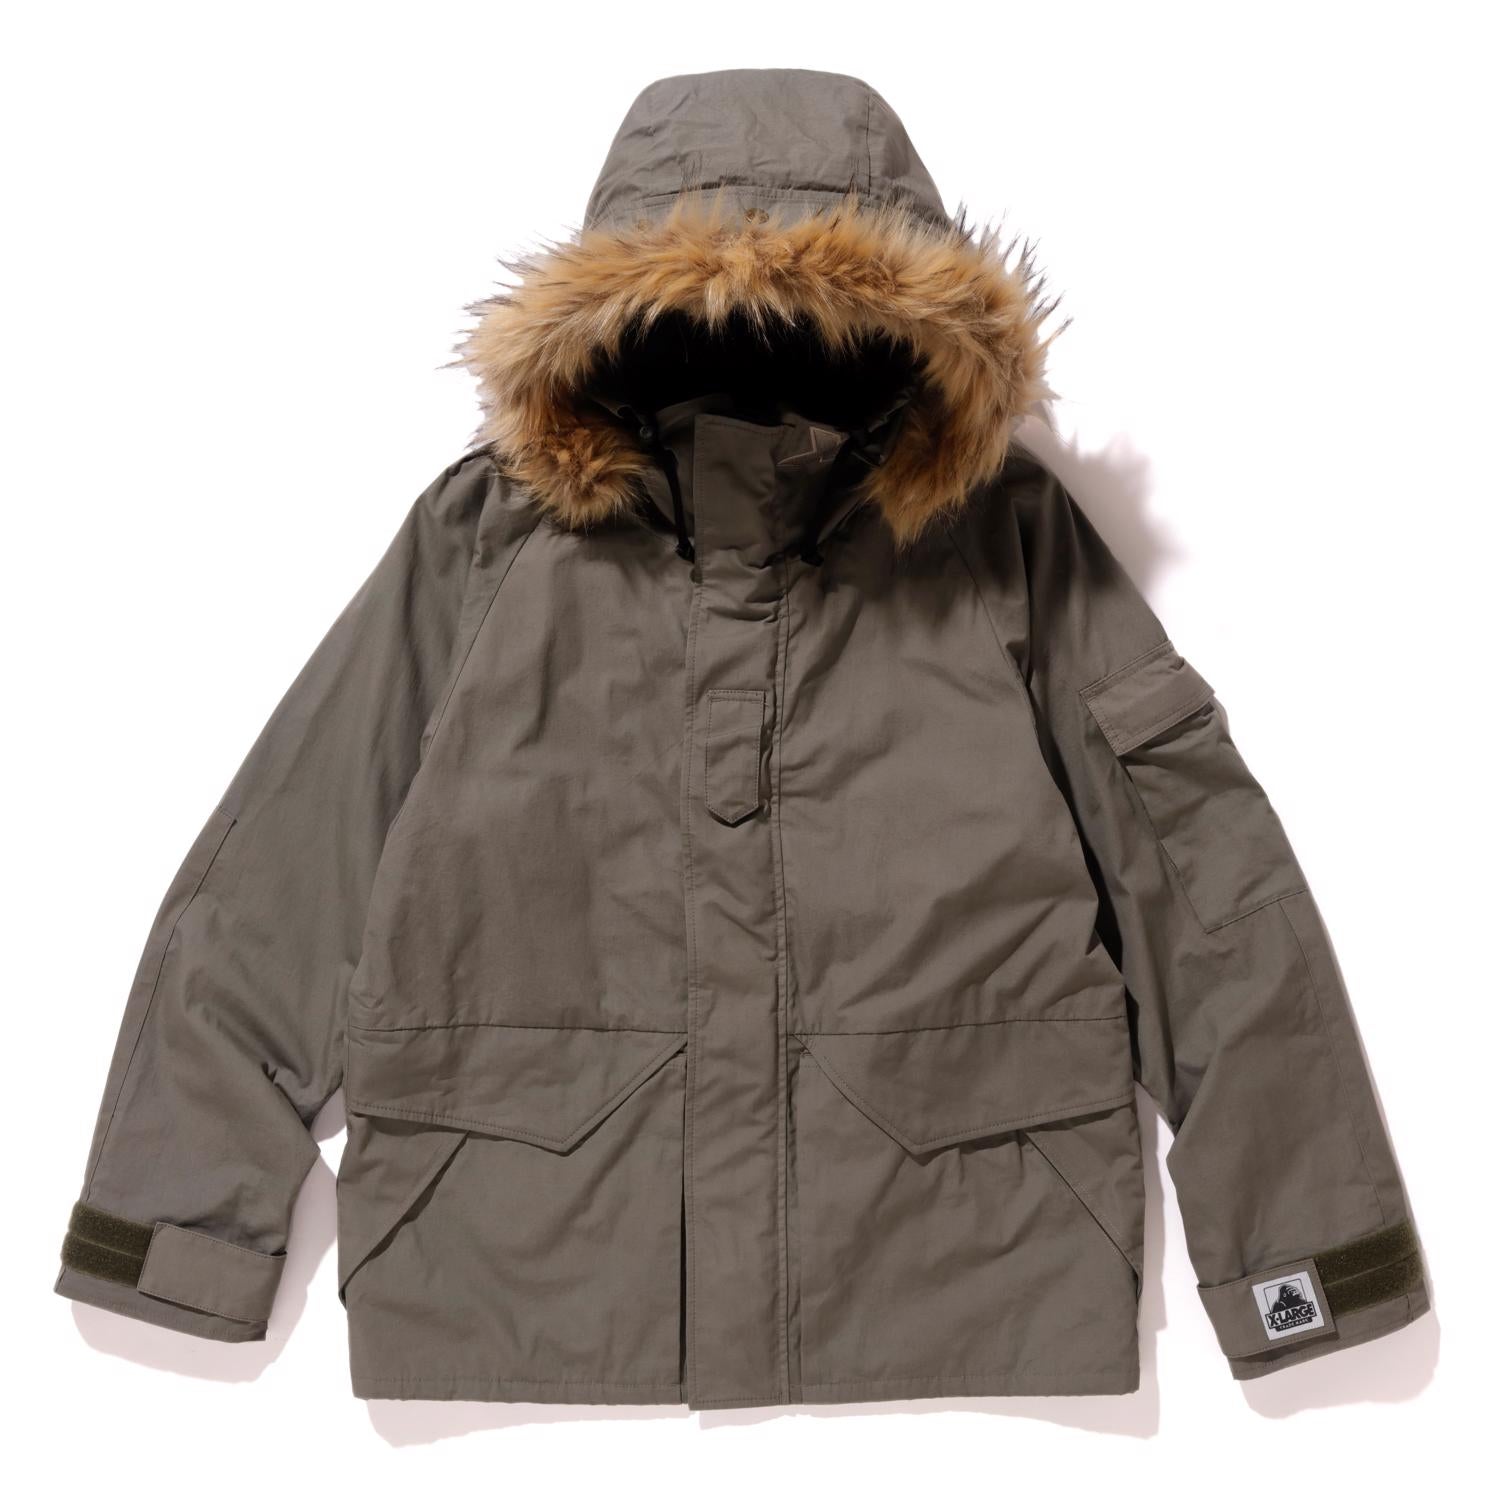 MILITARY HOODED JACKET OUTERWEAR XLARGE  